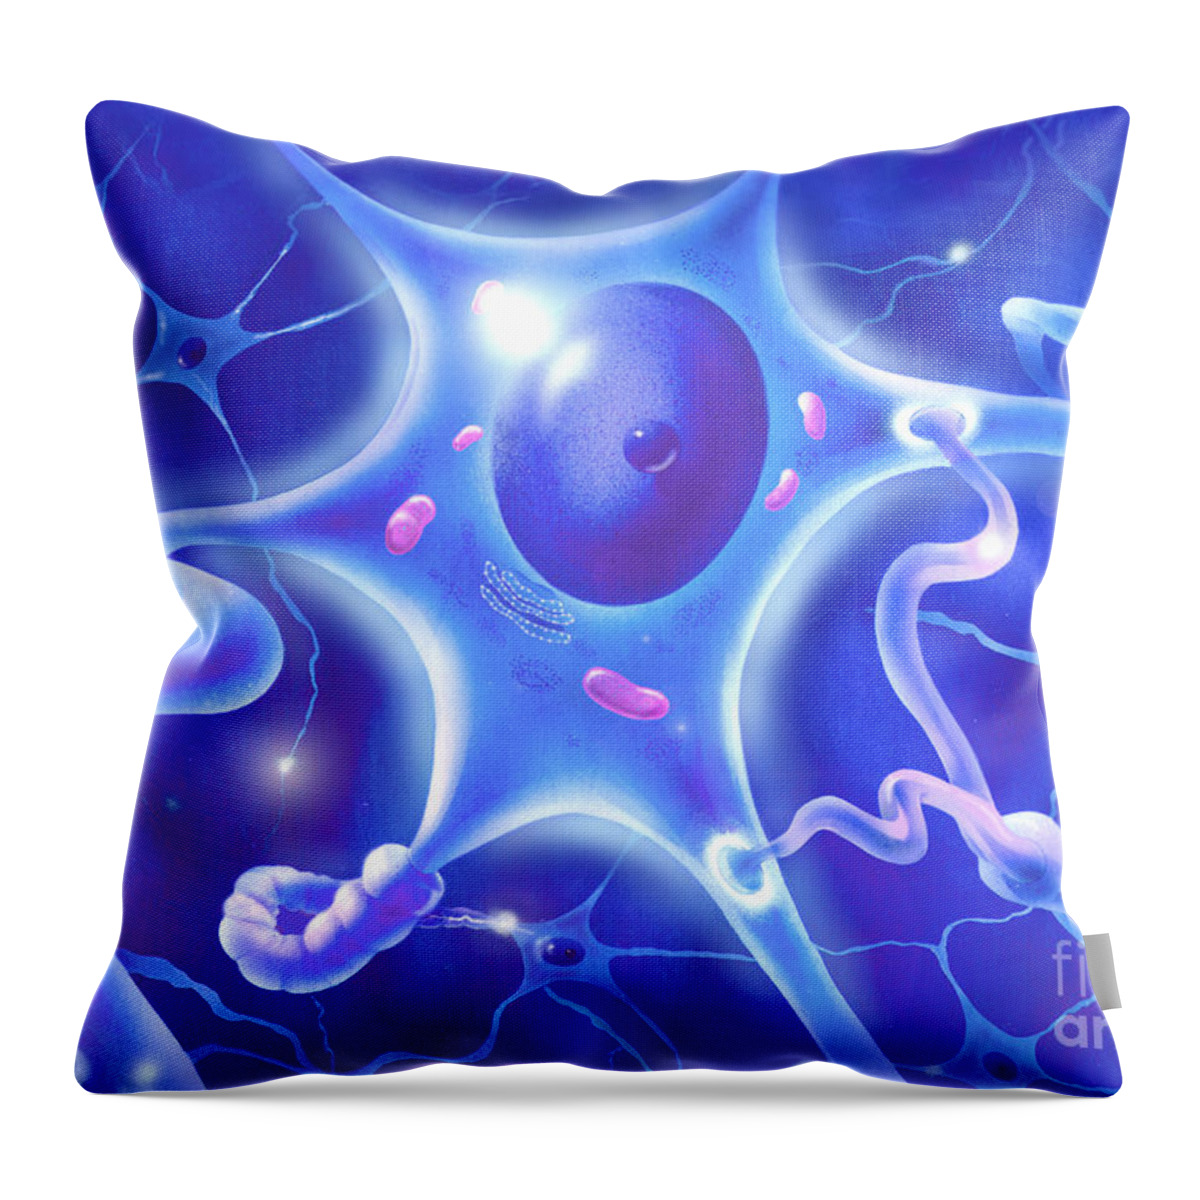 Neuron Throw Pillow featuring the photograph Motor Neuron by Jim Dowdalls